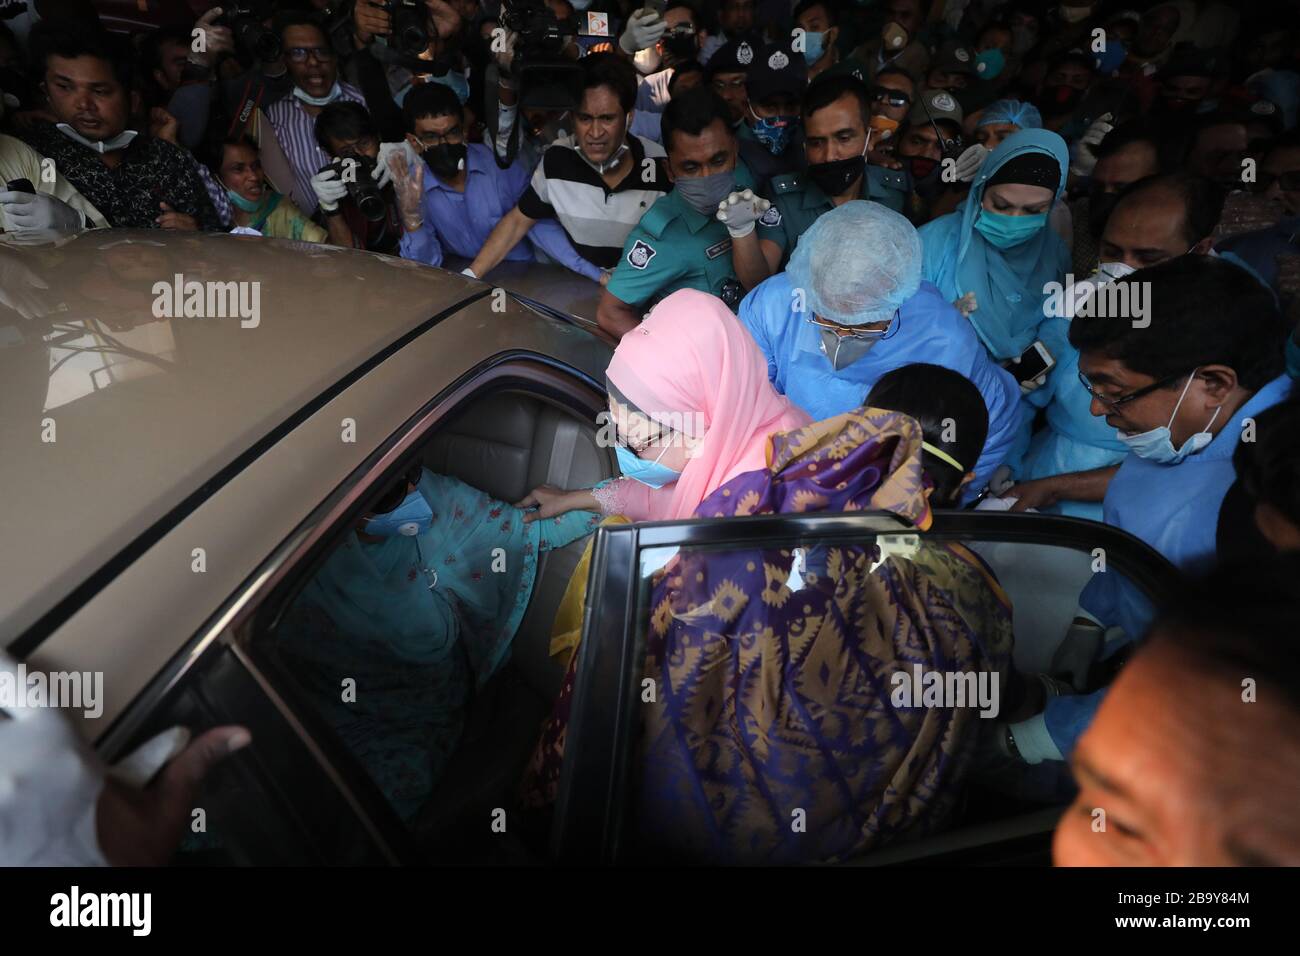 (200325) -- DHAKA, March 25, 2020 (Xinhua) -- Bangladeshi ex-Prime Minister Khaleda Zia in pink clothes leaves the Bangabandhu Sheikh Mujib Medical University (BSMMU) in Dhaka, Bangladesh, March 25, 2020. Khaleda Zia has been released from jail for six months on humanitarian grounds in light of the COVID-19 outbreak in the country.    Zia, also chairperson of Bangladesh Nationalist Party (BNP), at around 4:15 p.m. local time on Wednesday, came out of Bangabandhu Sheikh Mujib Medical University (BSMMU) in capital Dhaka, where she was being treated.     In April 2018, Zia was shifted to the BSMM Stock Photo